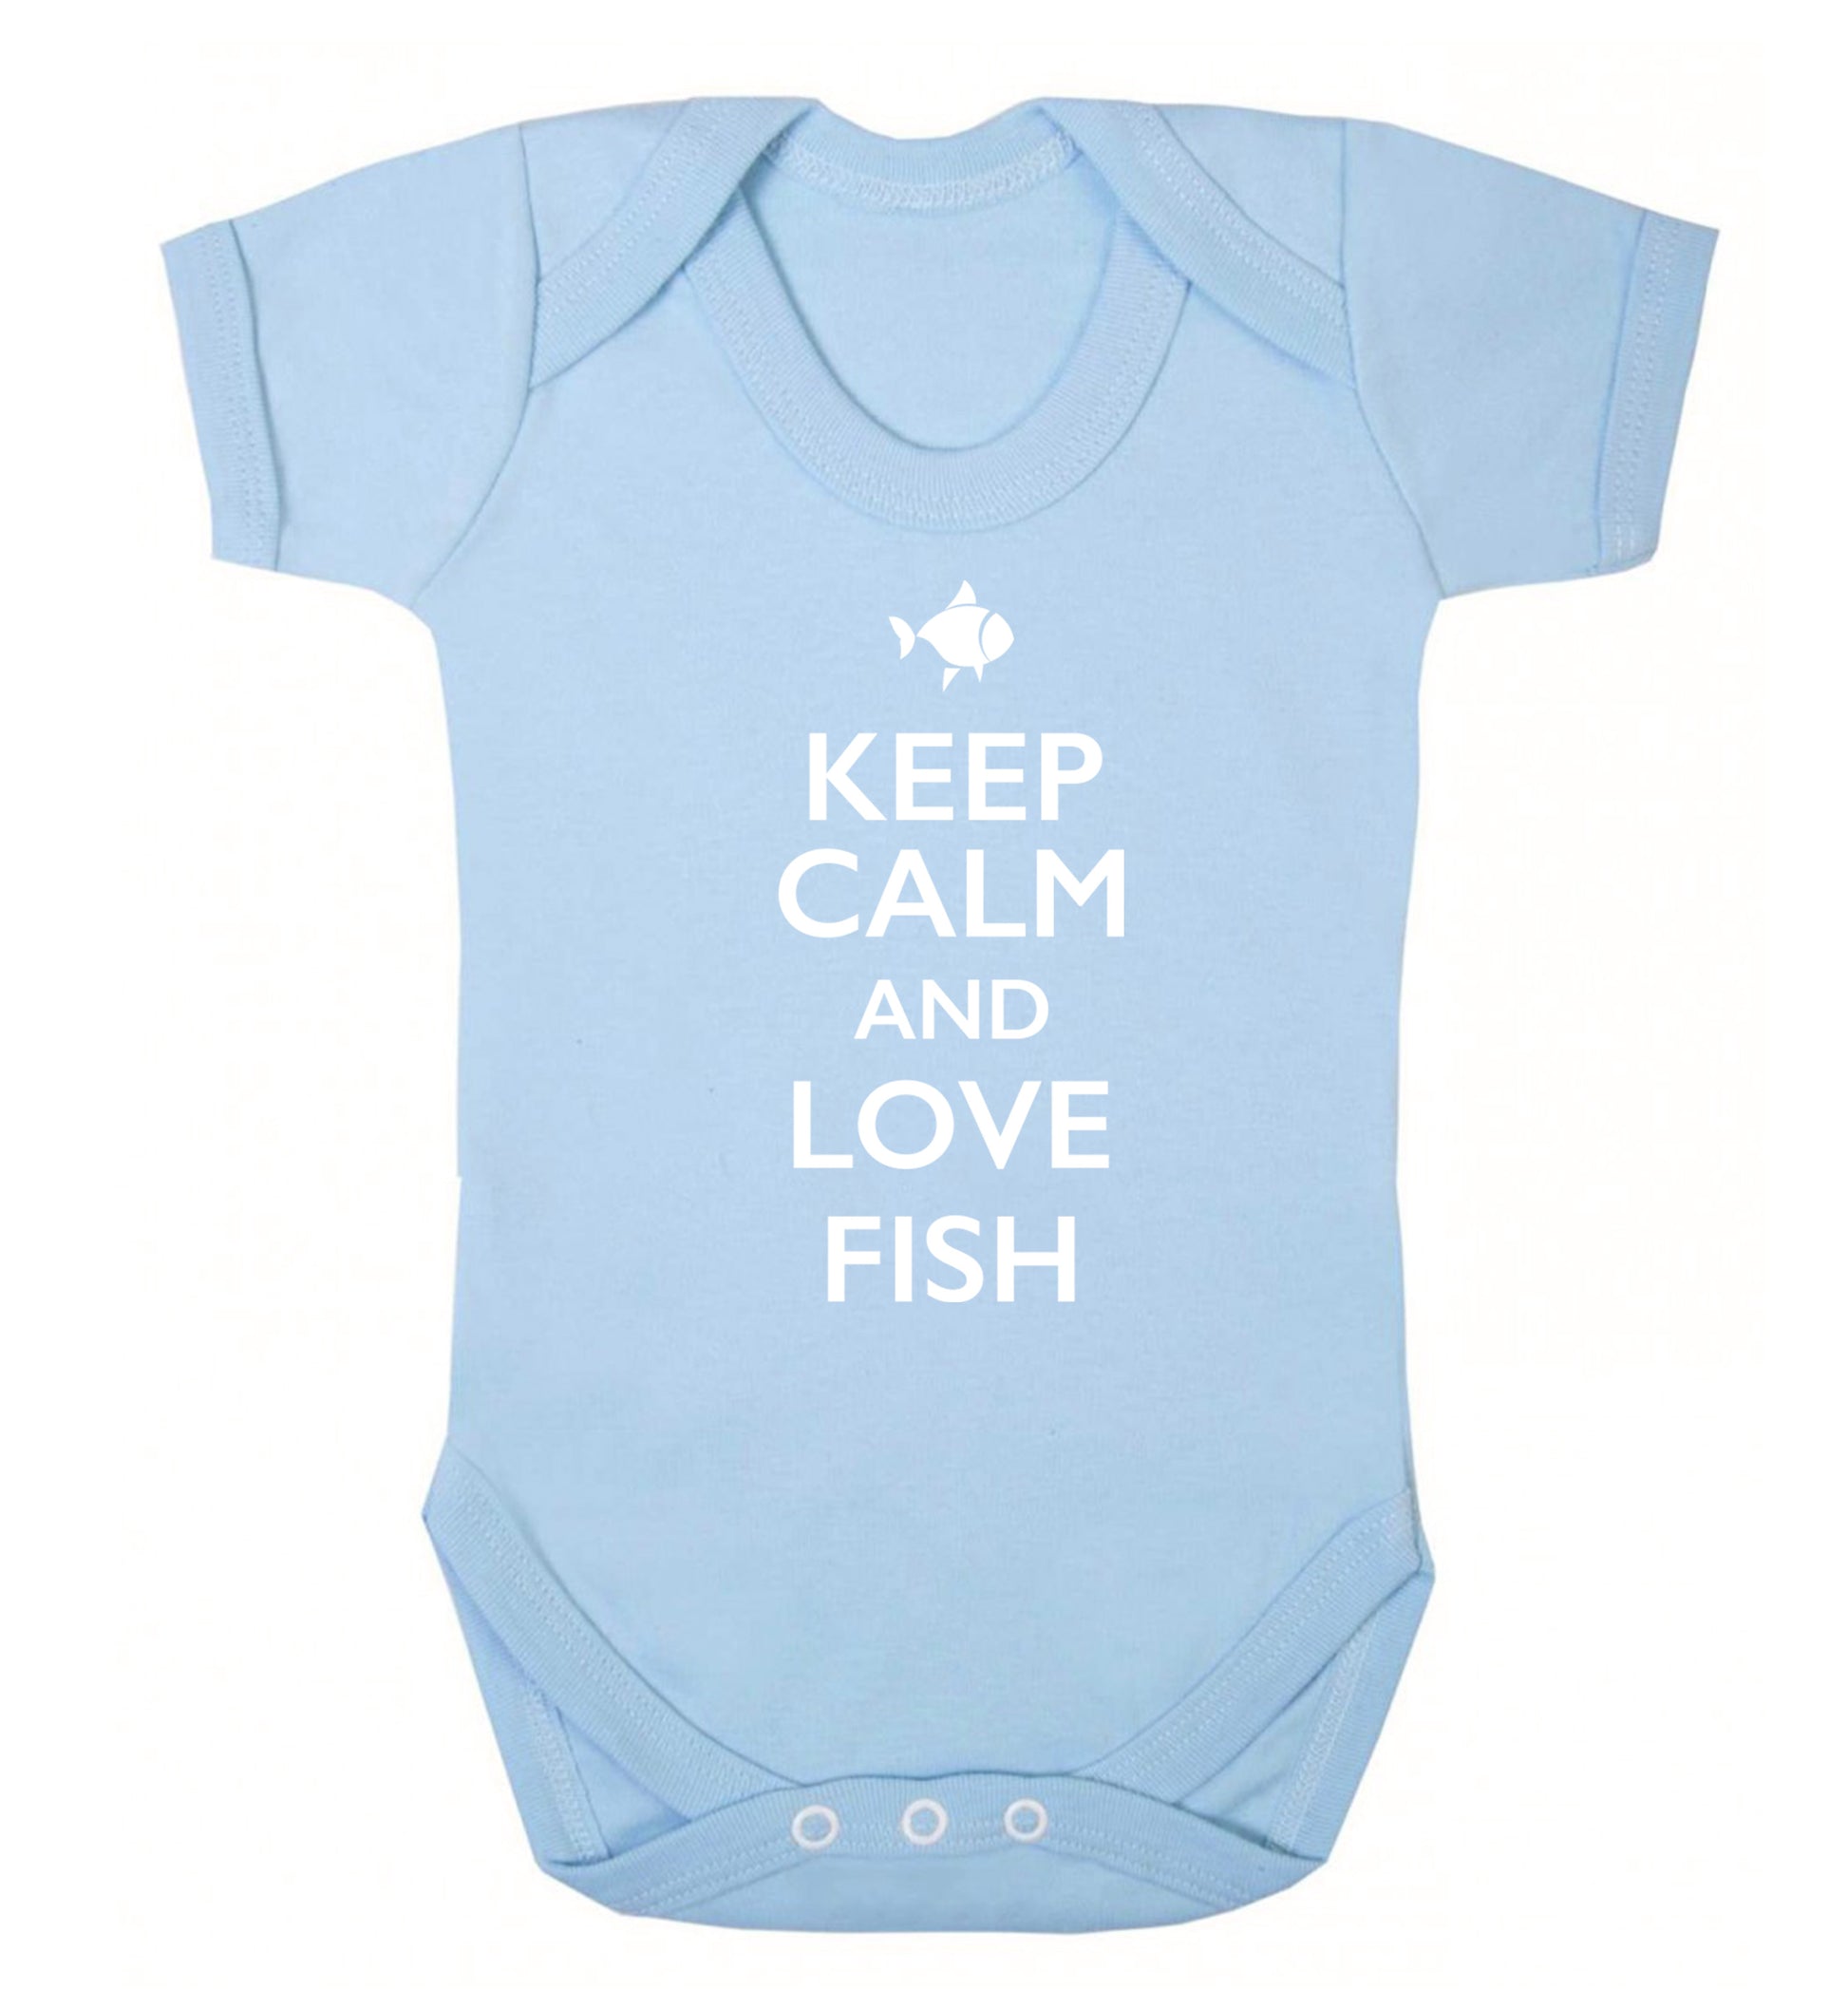 Keep calm and love fish Baby Vest pale blue 18-24 months